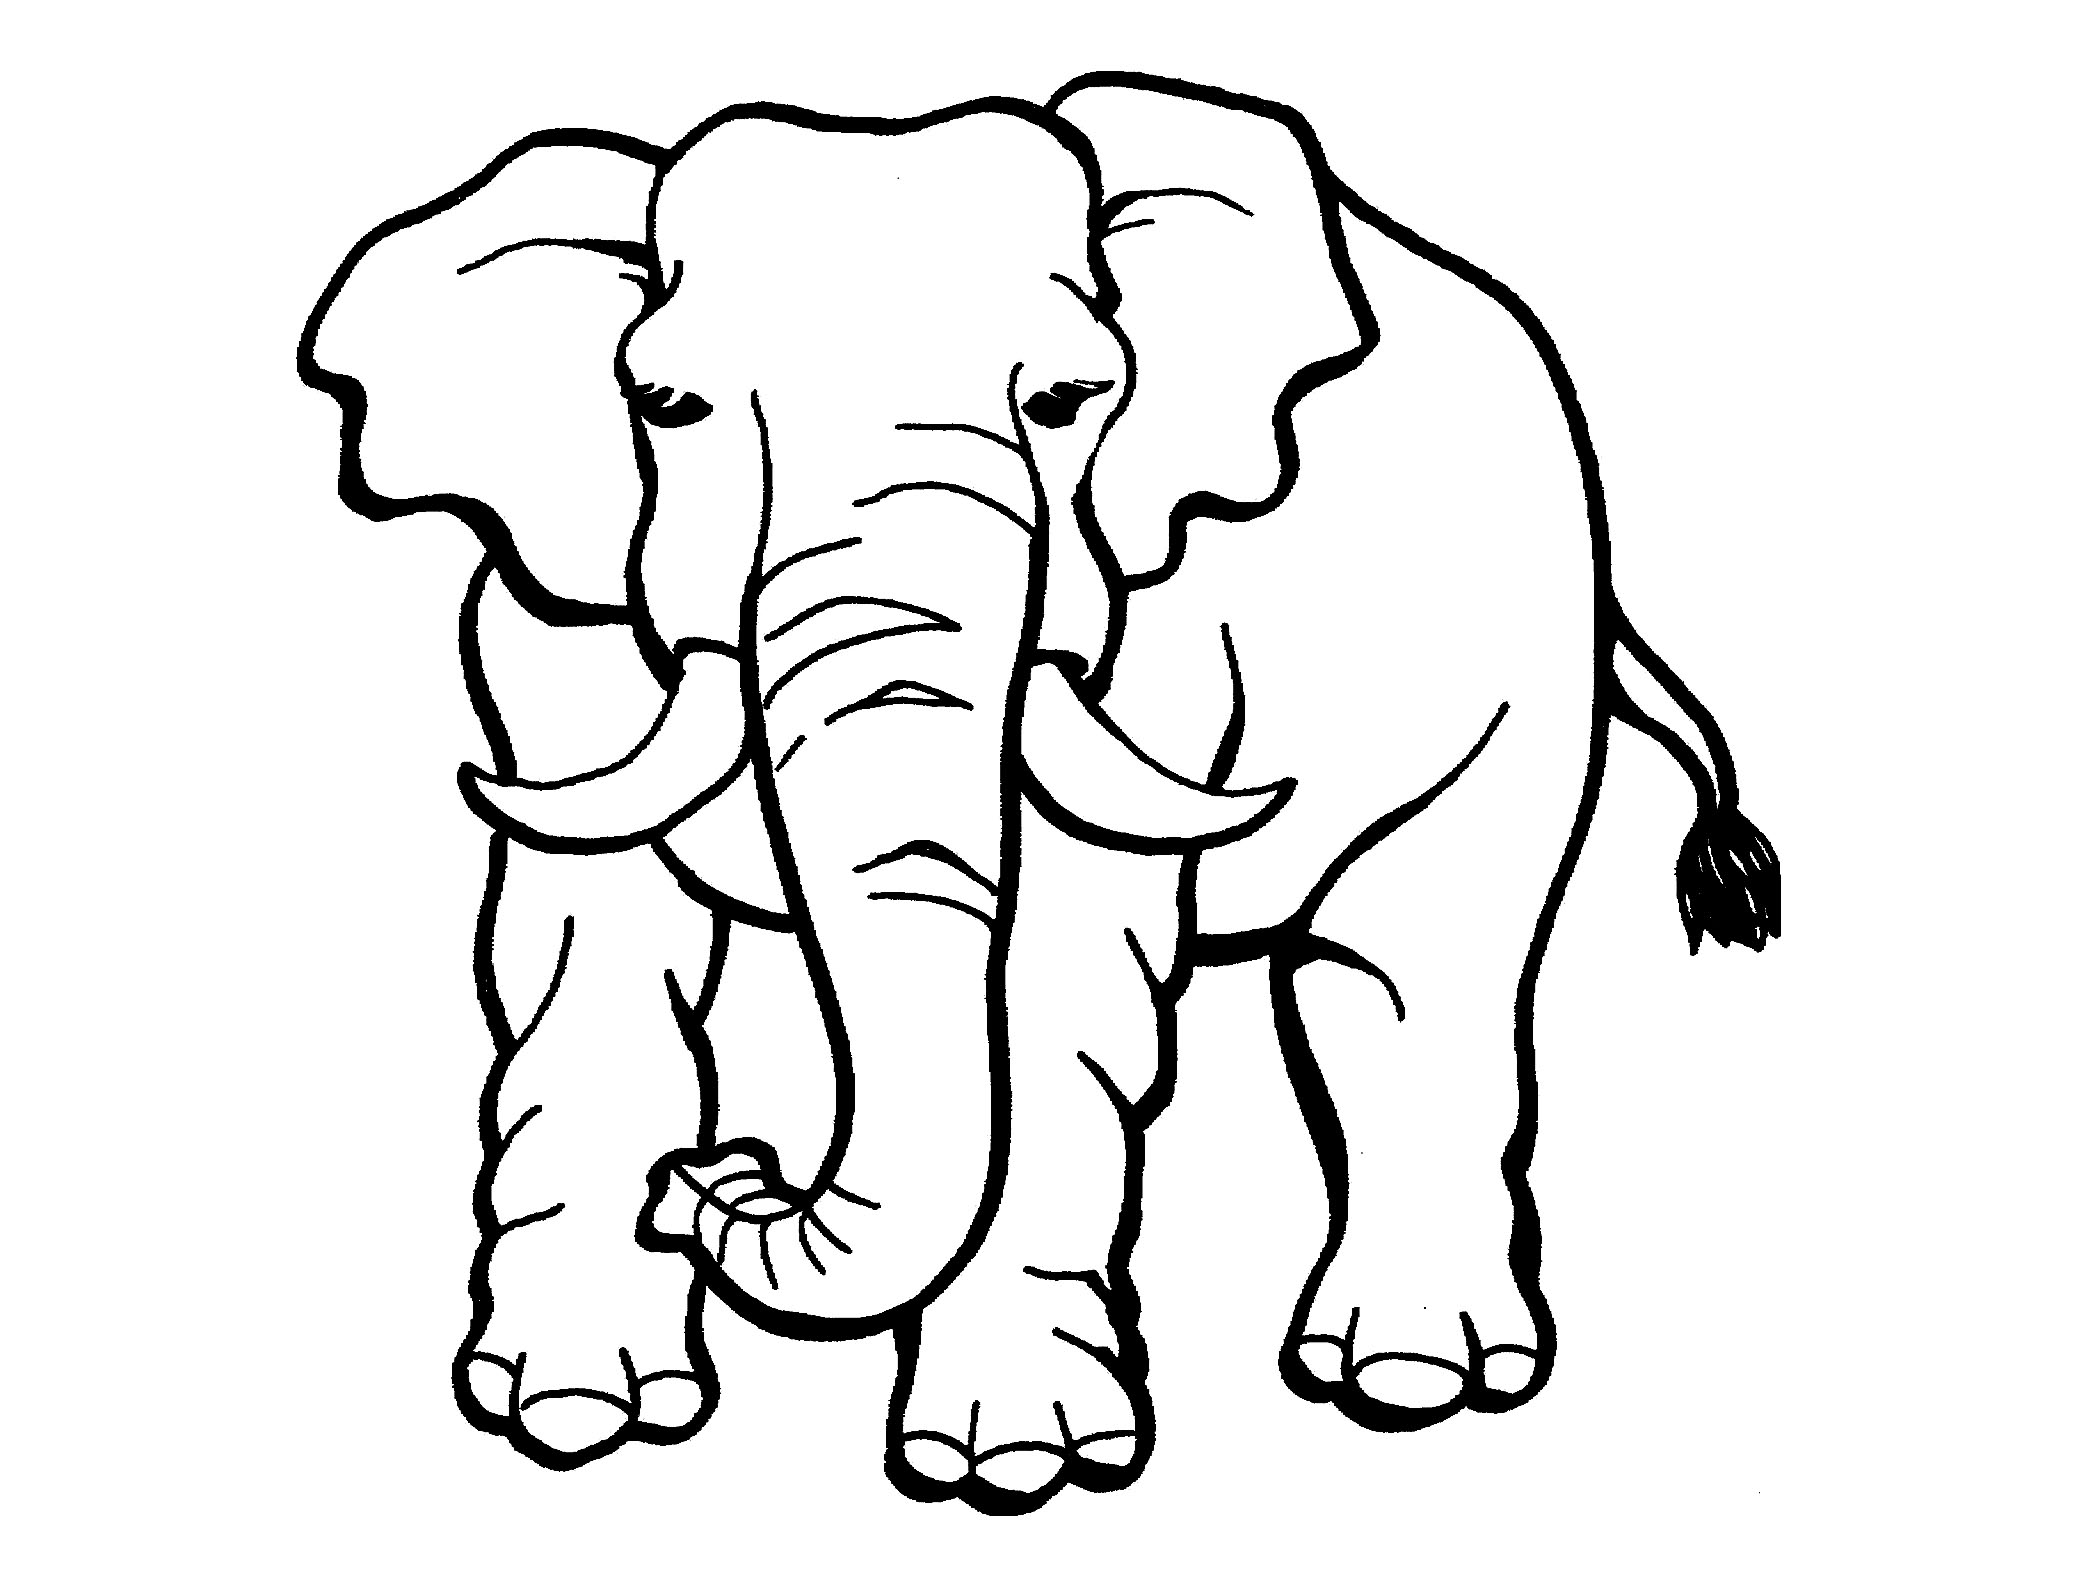 Great elephant coloring for kids